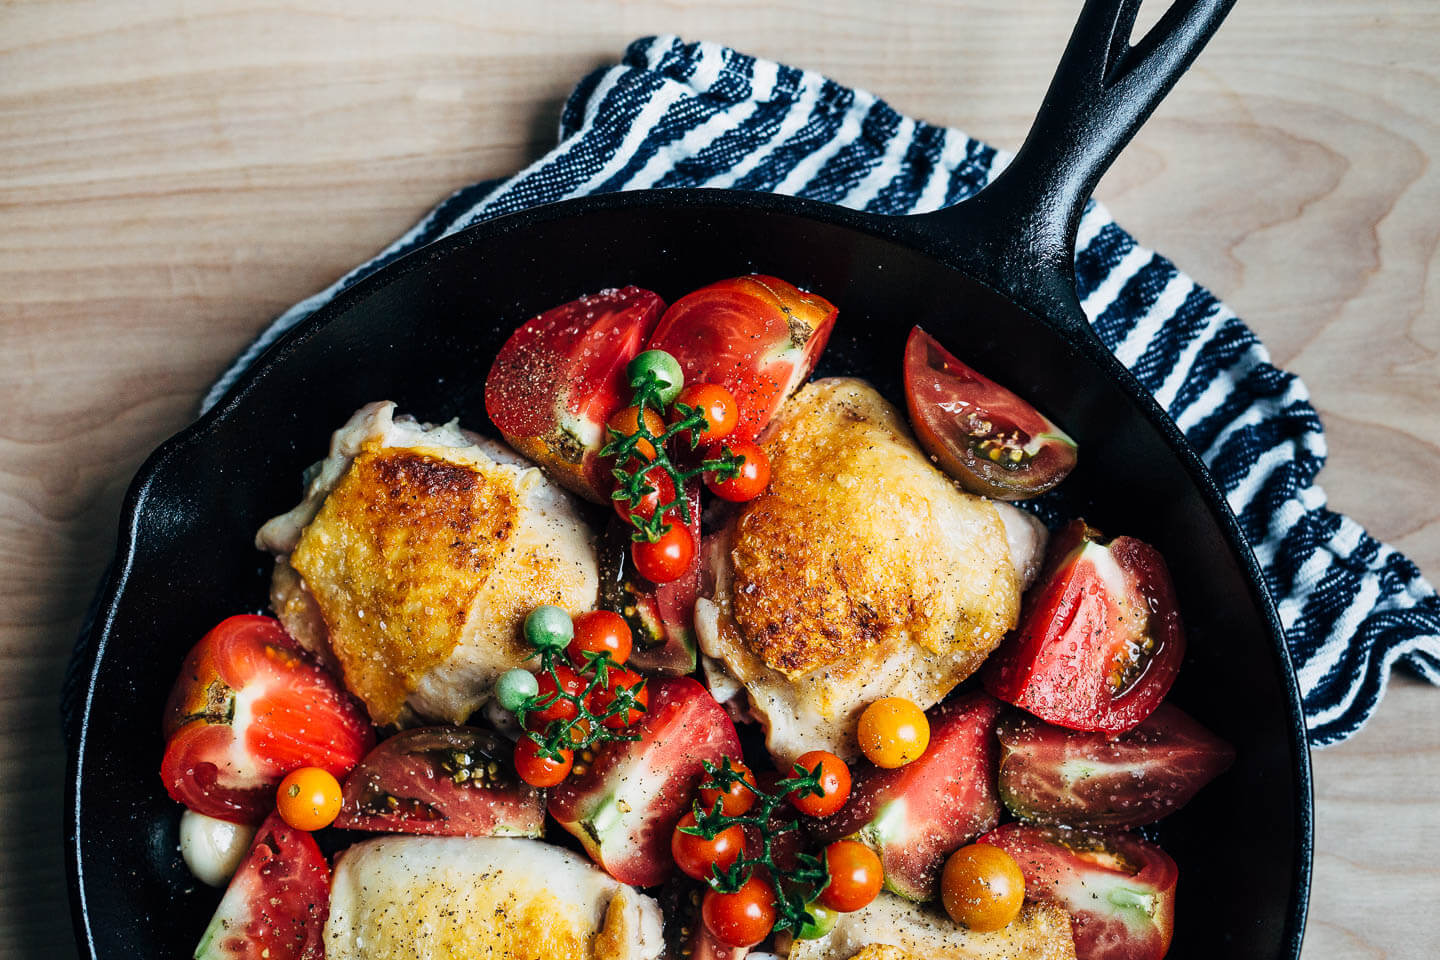 Cast iron-seared chicken thighs with heirloom tomatoes tucked all around. 